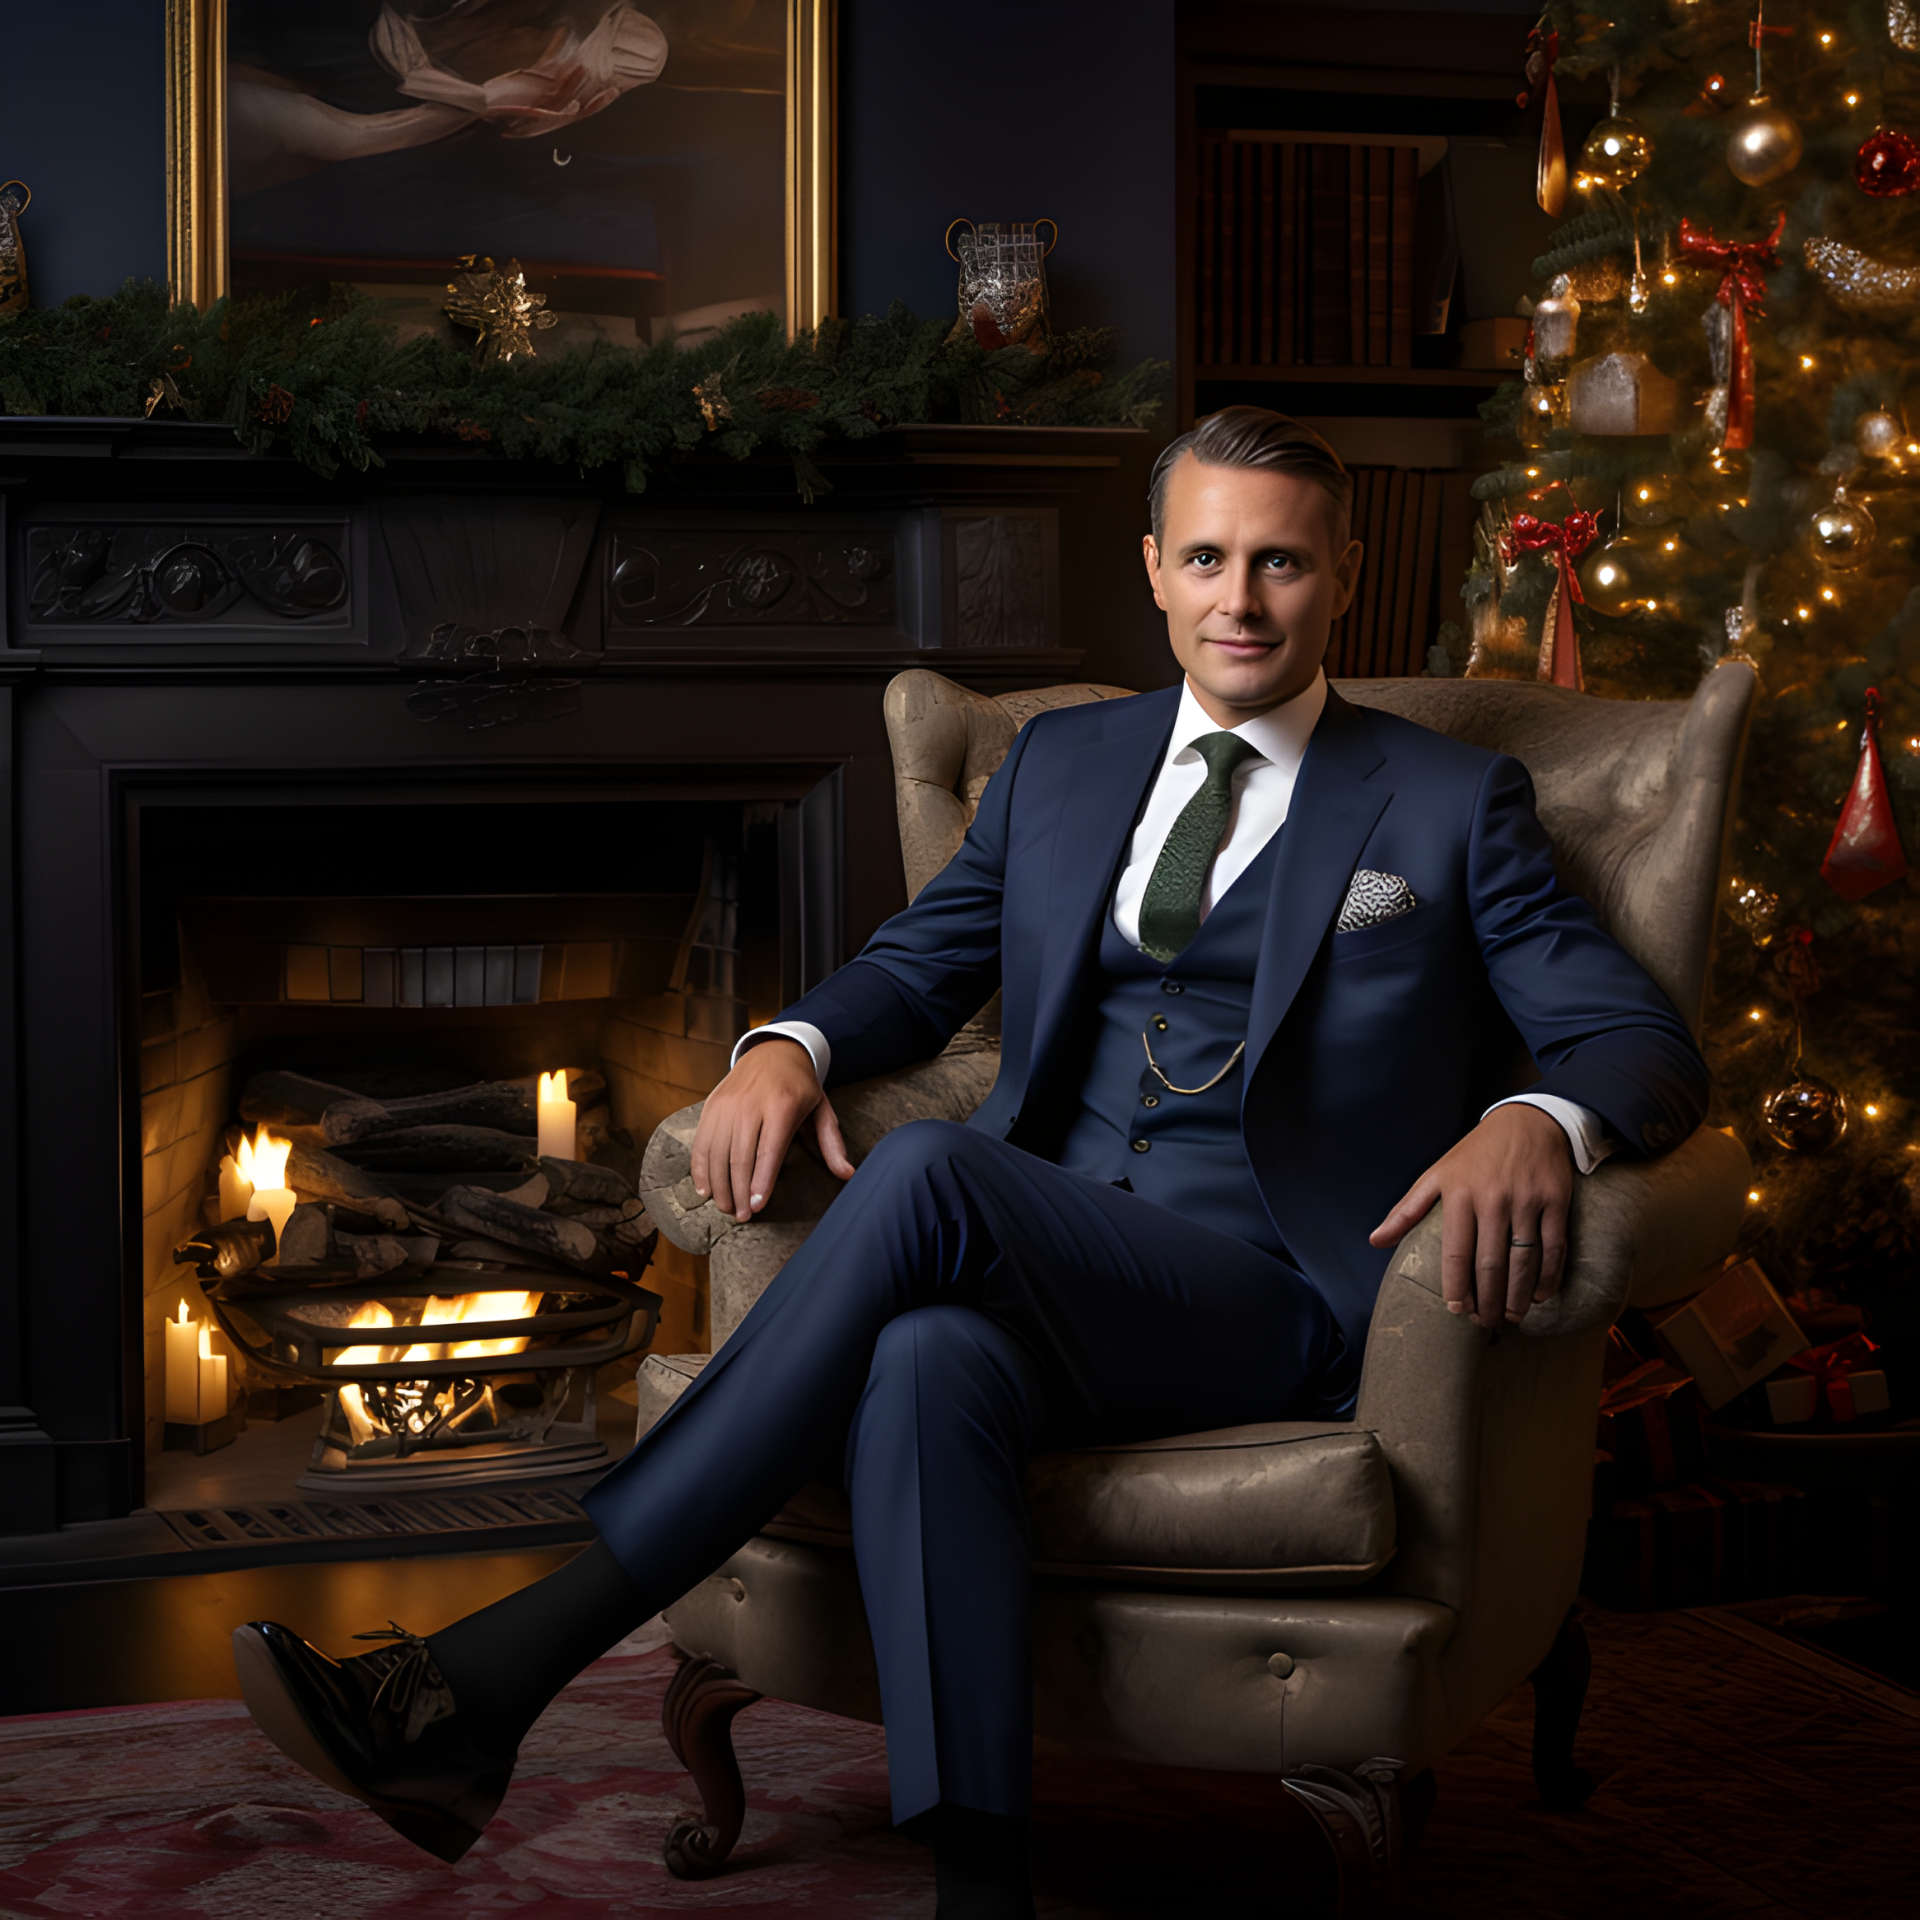 A man who has upgraded his Christmas wardrobe by wearing a bespoke suit